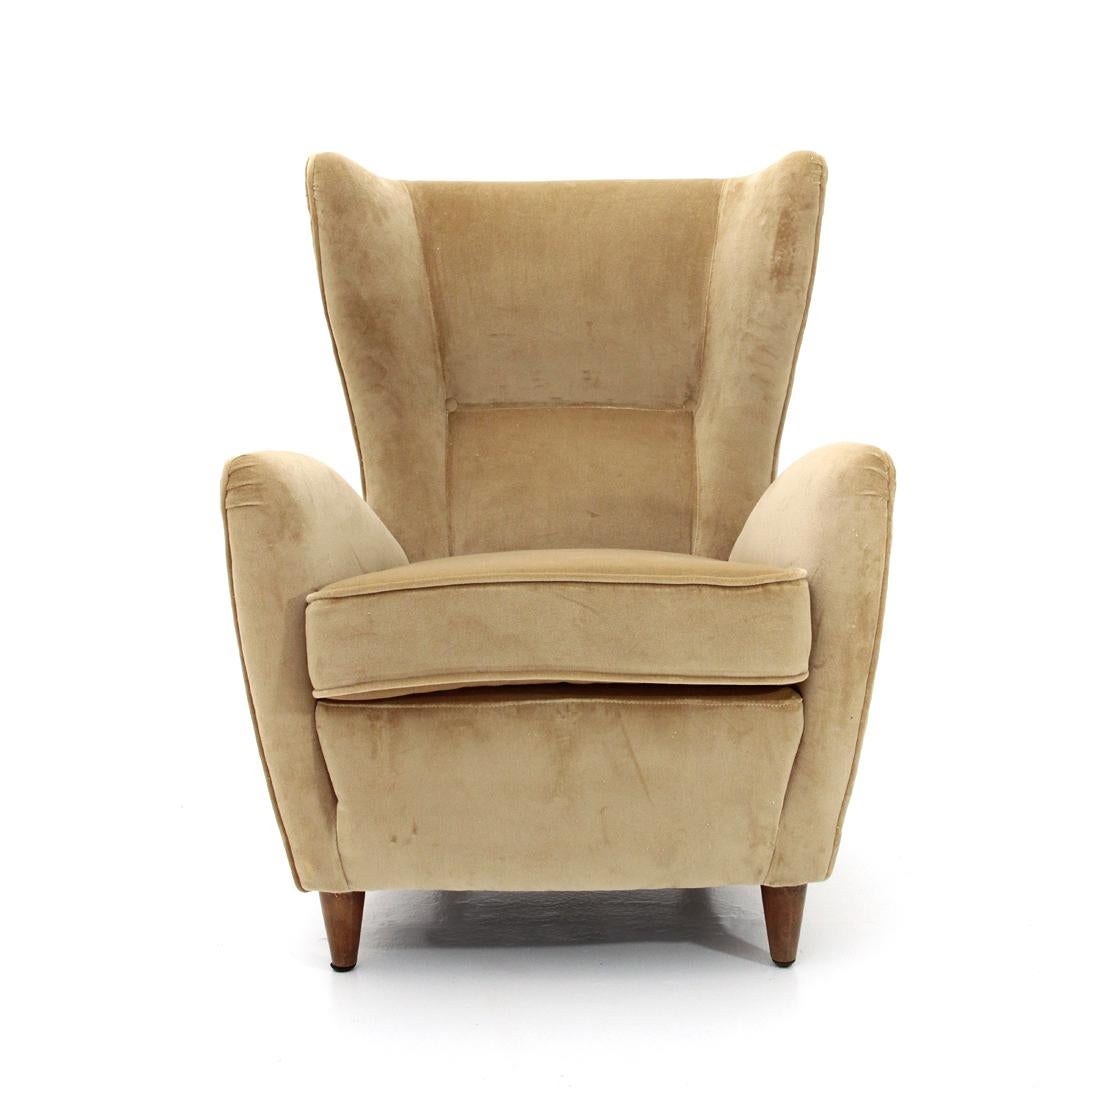 Italian manufacturing armchair produced in the 1950s.
Wooden frame padded and lined with new beige velvet fabric.
Back with stitched buttons.
Seat with cushion, removable lining.
Legs in turned wood.
Excellent general conditions.

Dimensions: